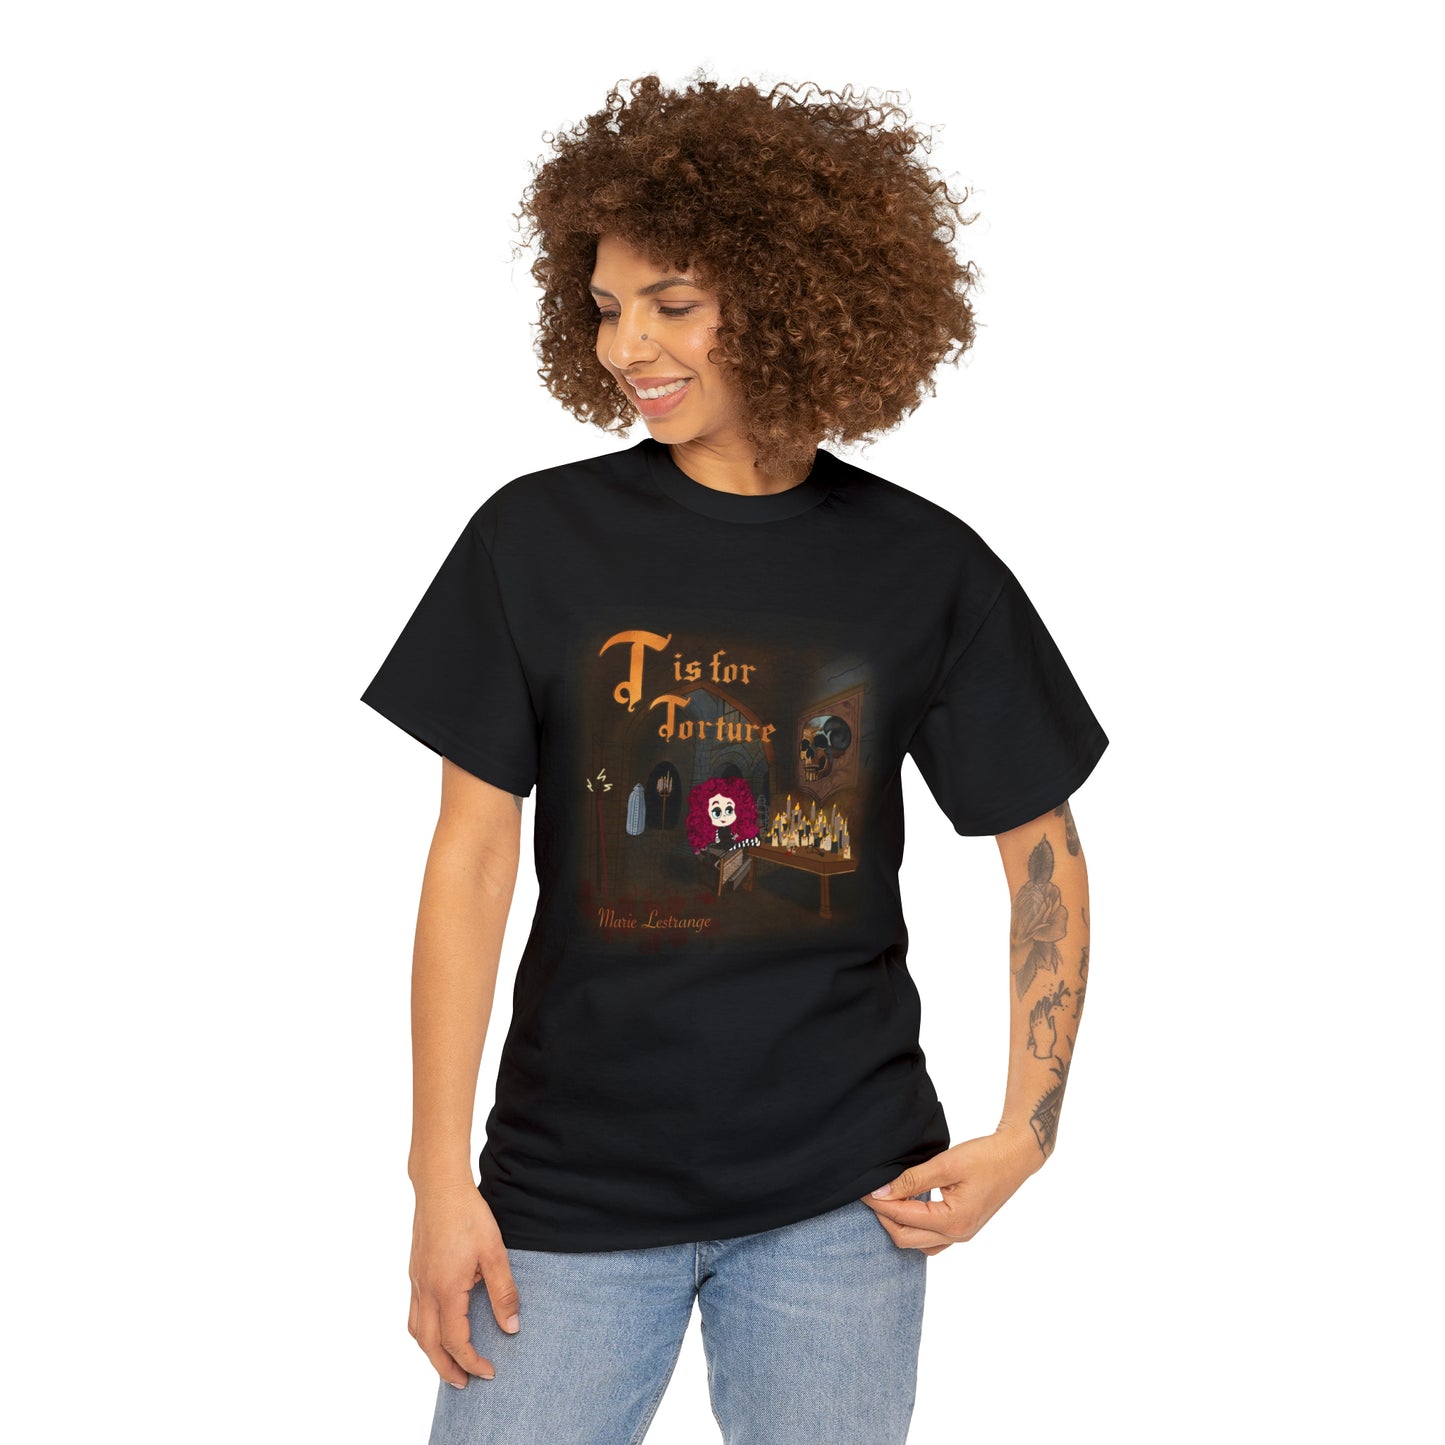 T is for Torture Tee